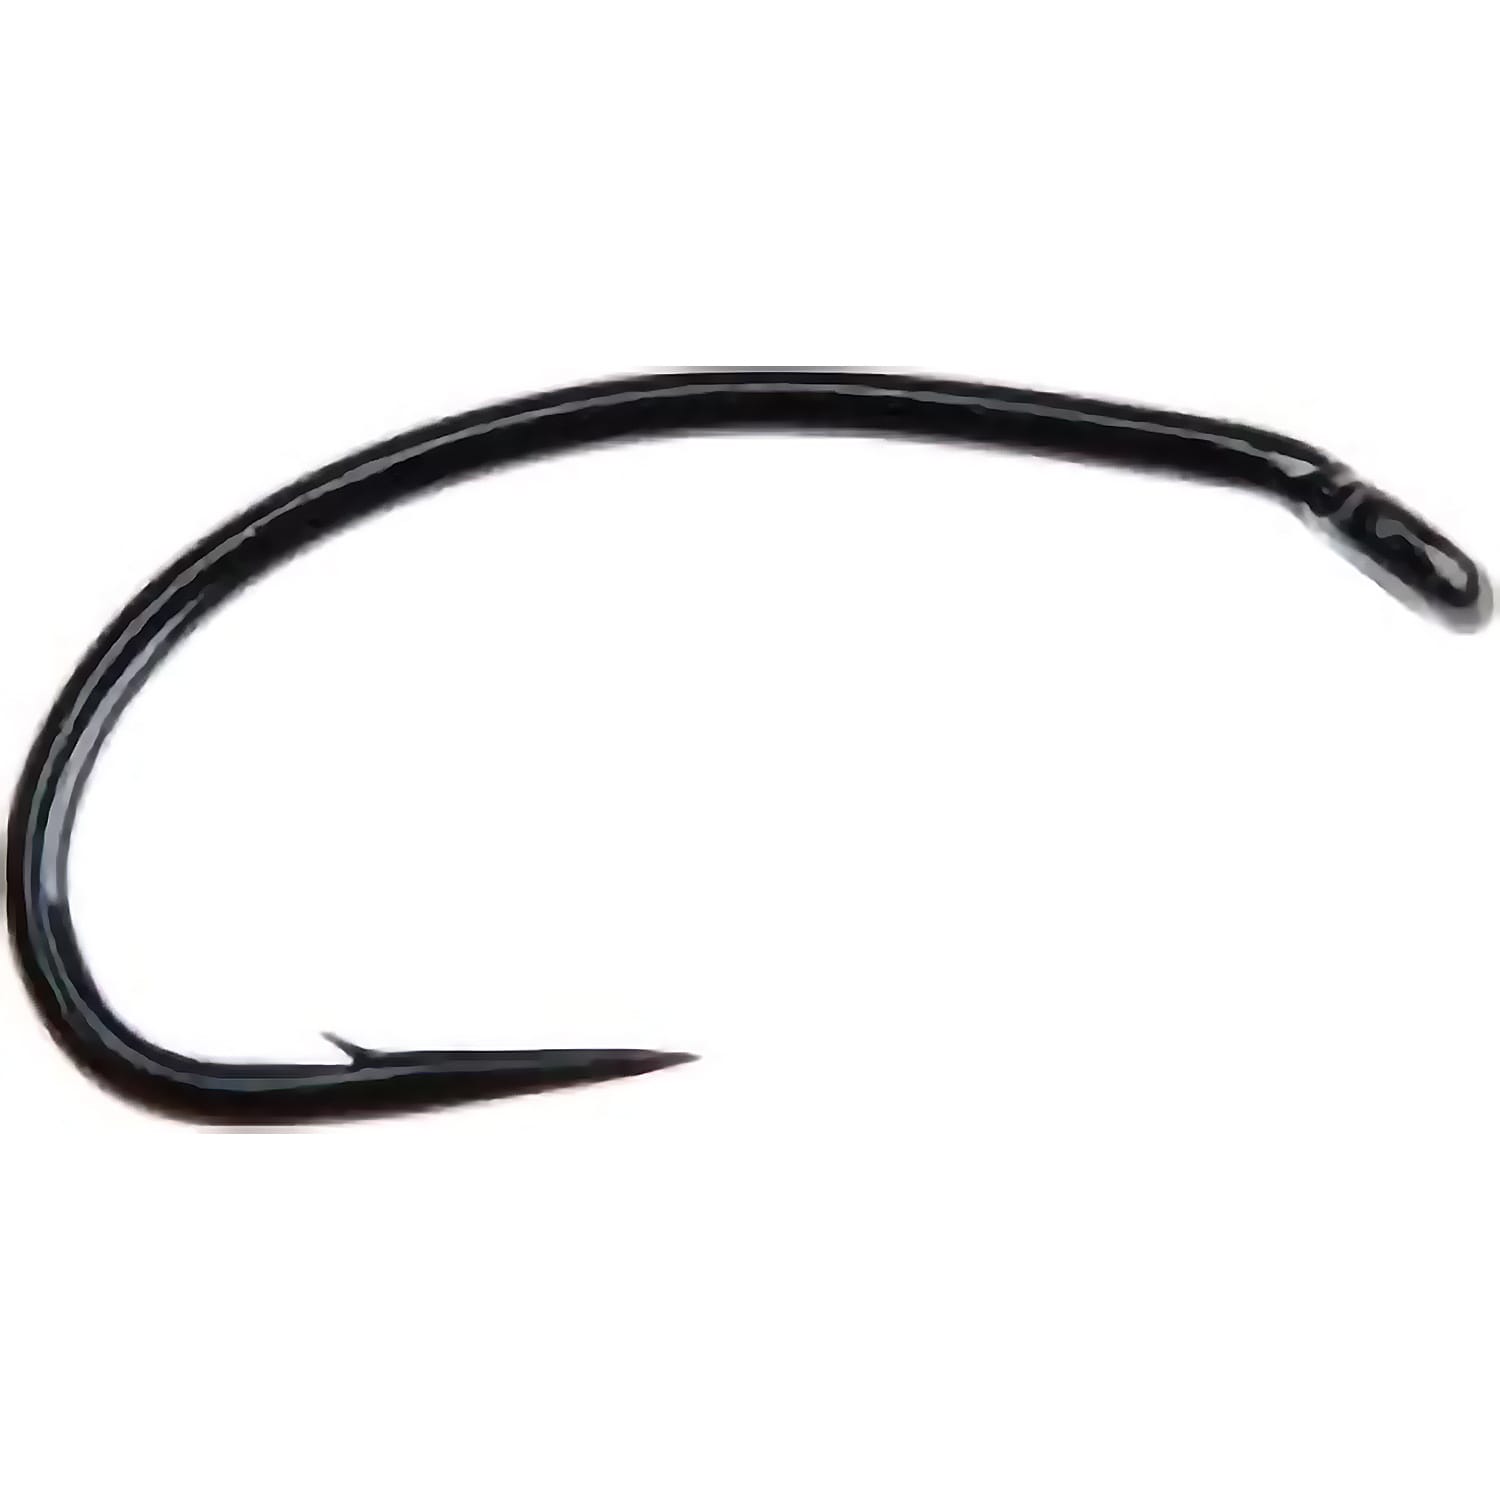 Ahrex® Curved Nymph Hook – 24-Pack